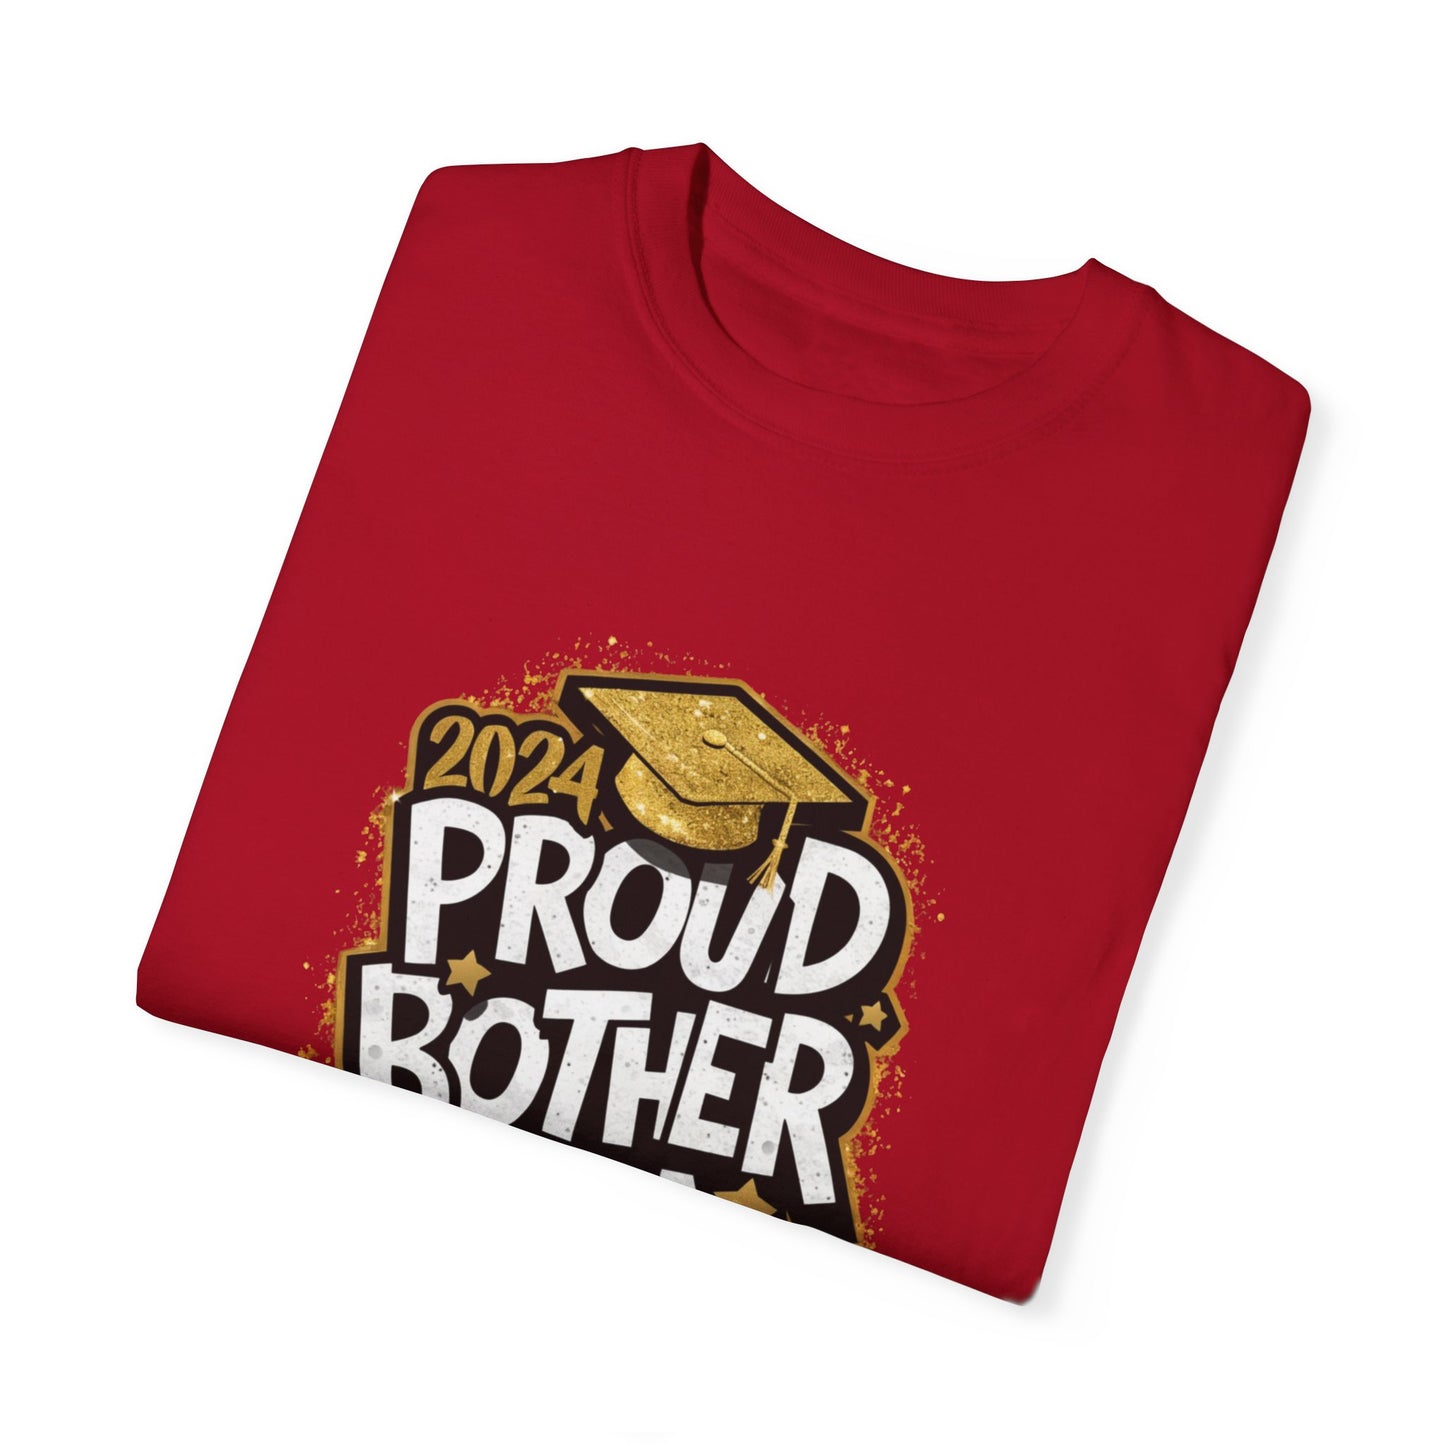 Proud Brother of a 2024 Graduate Unisex Garment-dyed T-shirt Cotton Funny Humorous Graphic Soft Premium Unisex Men Women Red T-shirt Birthday Gift-20